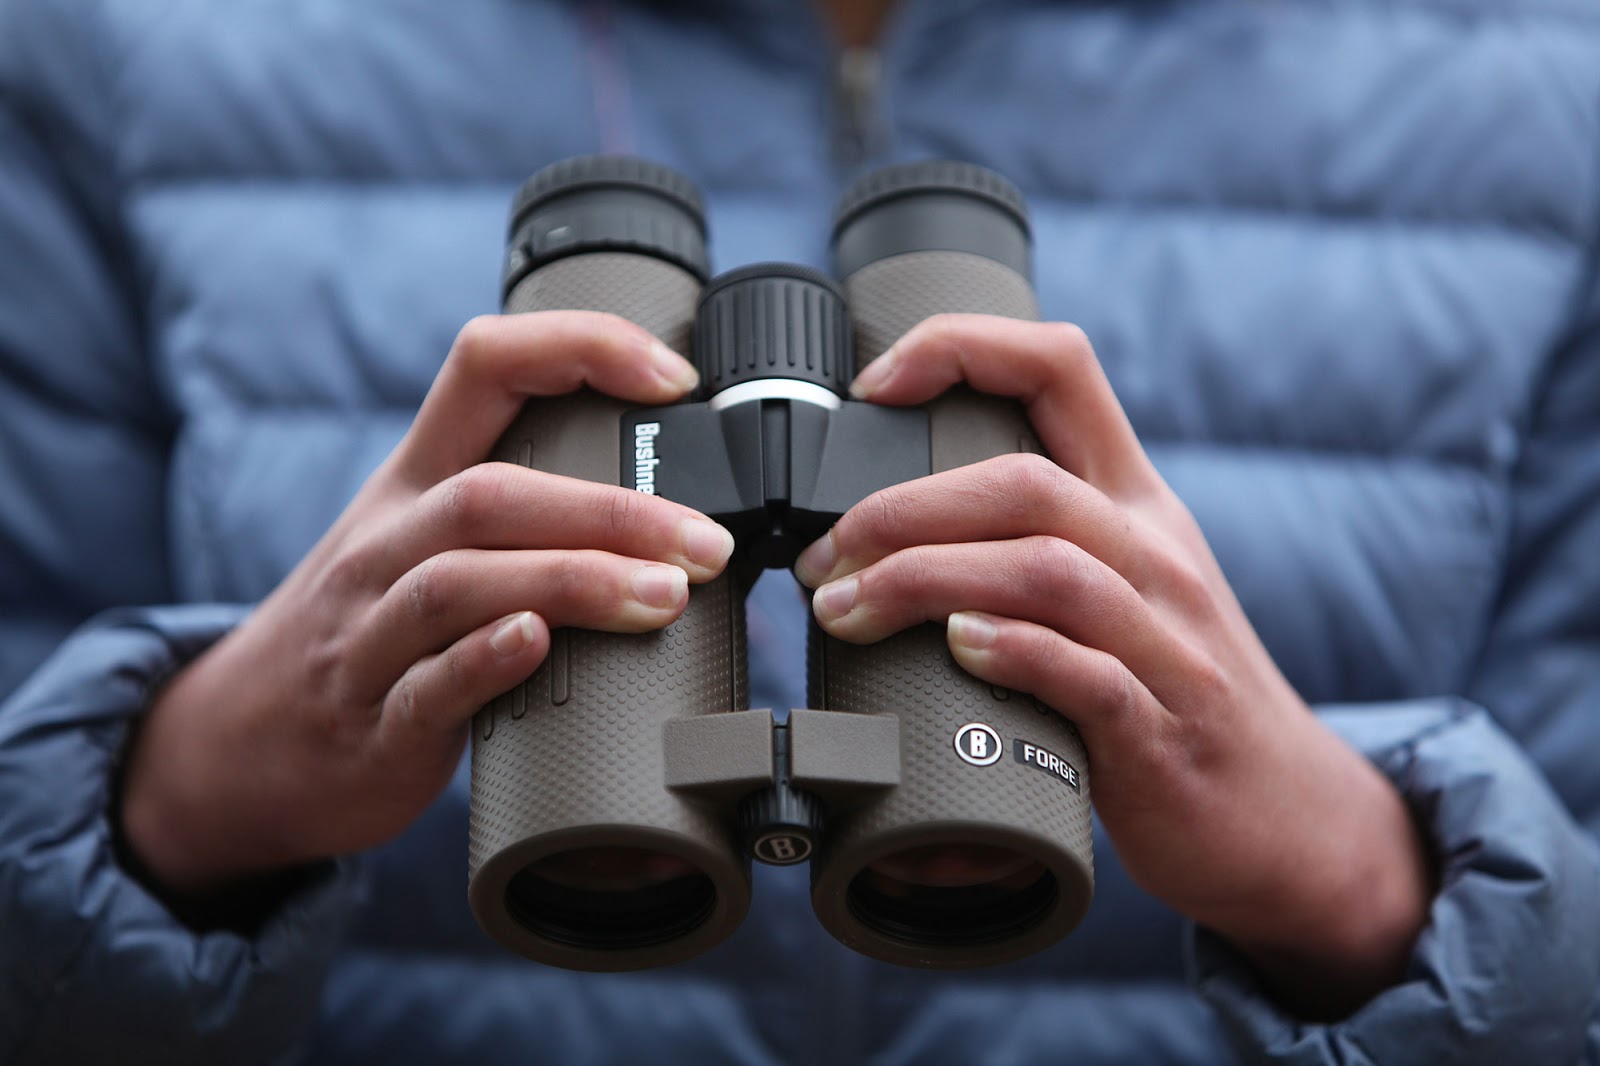 Person holding Bushnell Forge Binoculars